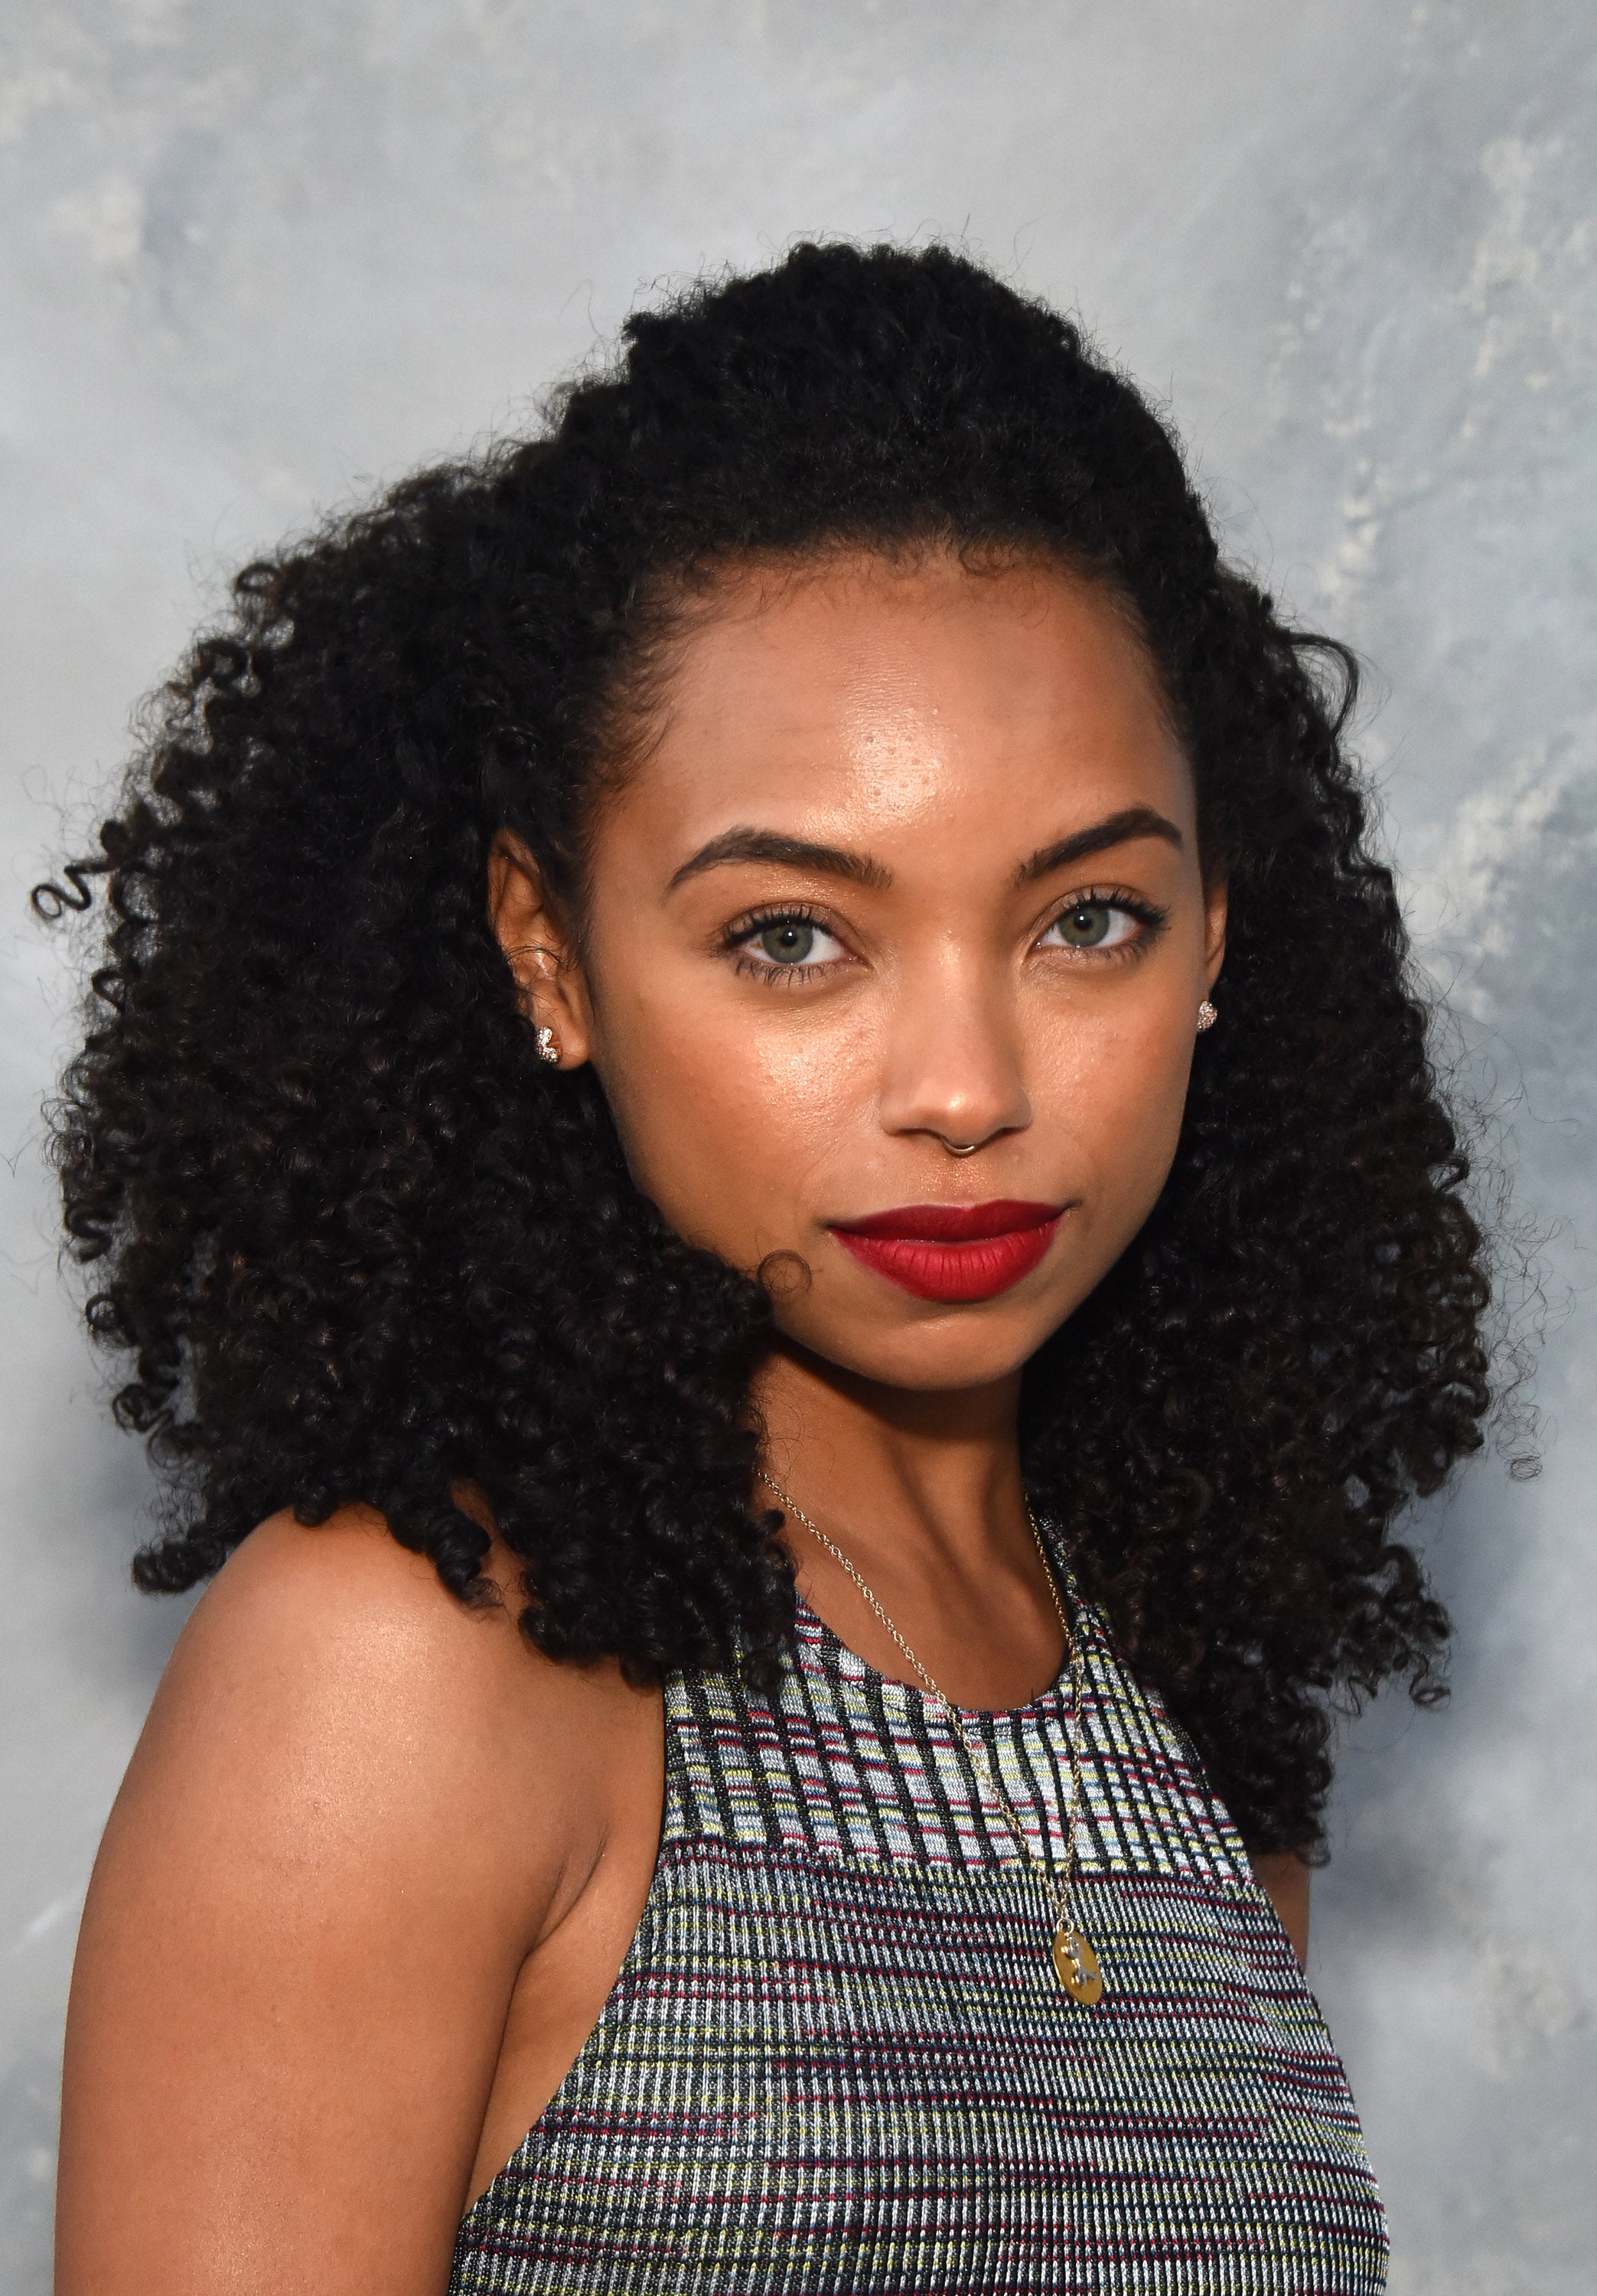 'Dear White People' Star Logan Browning Is Our New Curly Girl Crush
